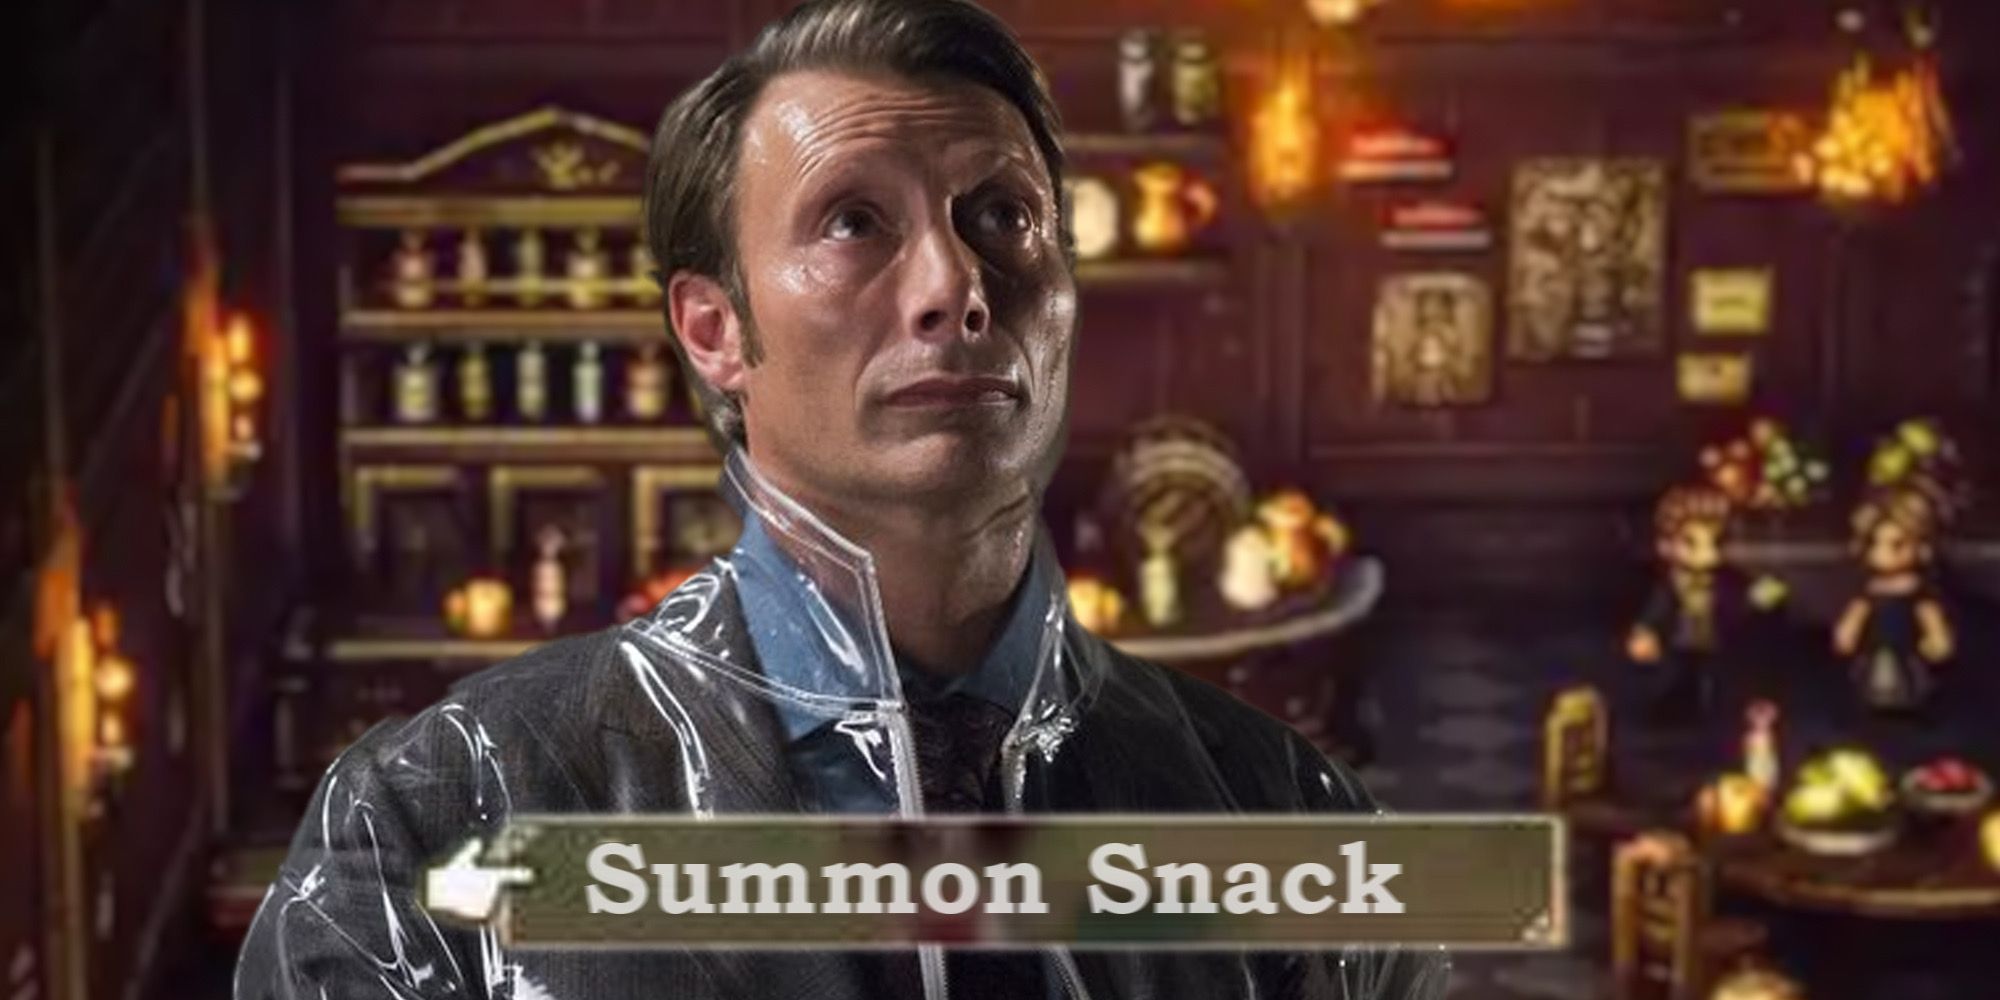 Hannibal on superimposed over Octopath Traveler 2 with Summon Snack option in text